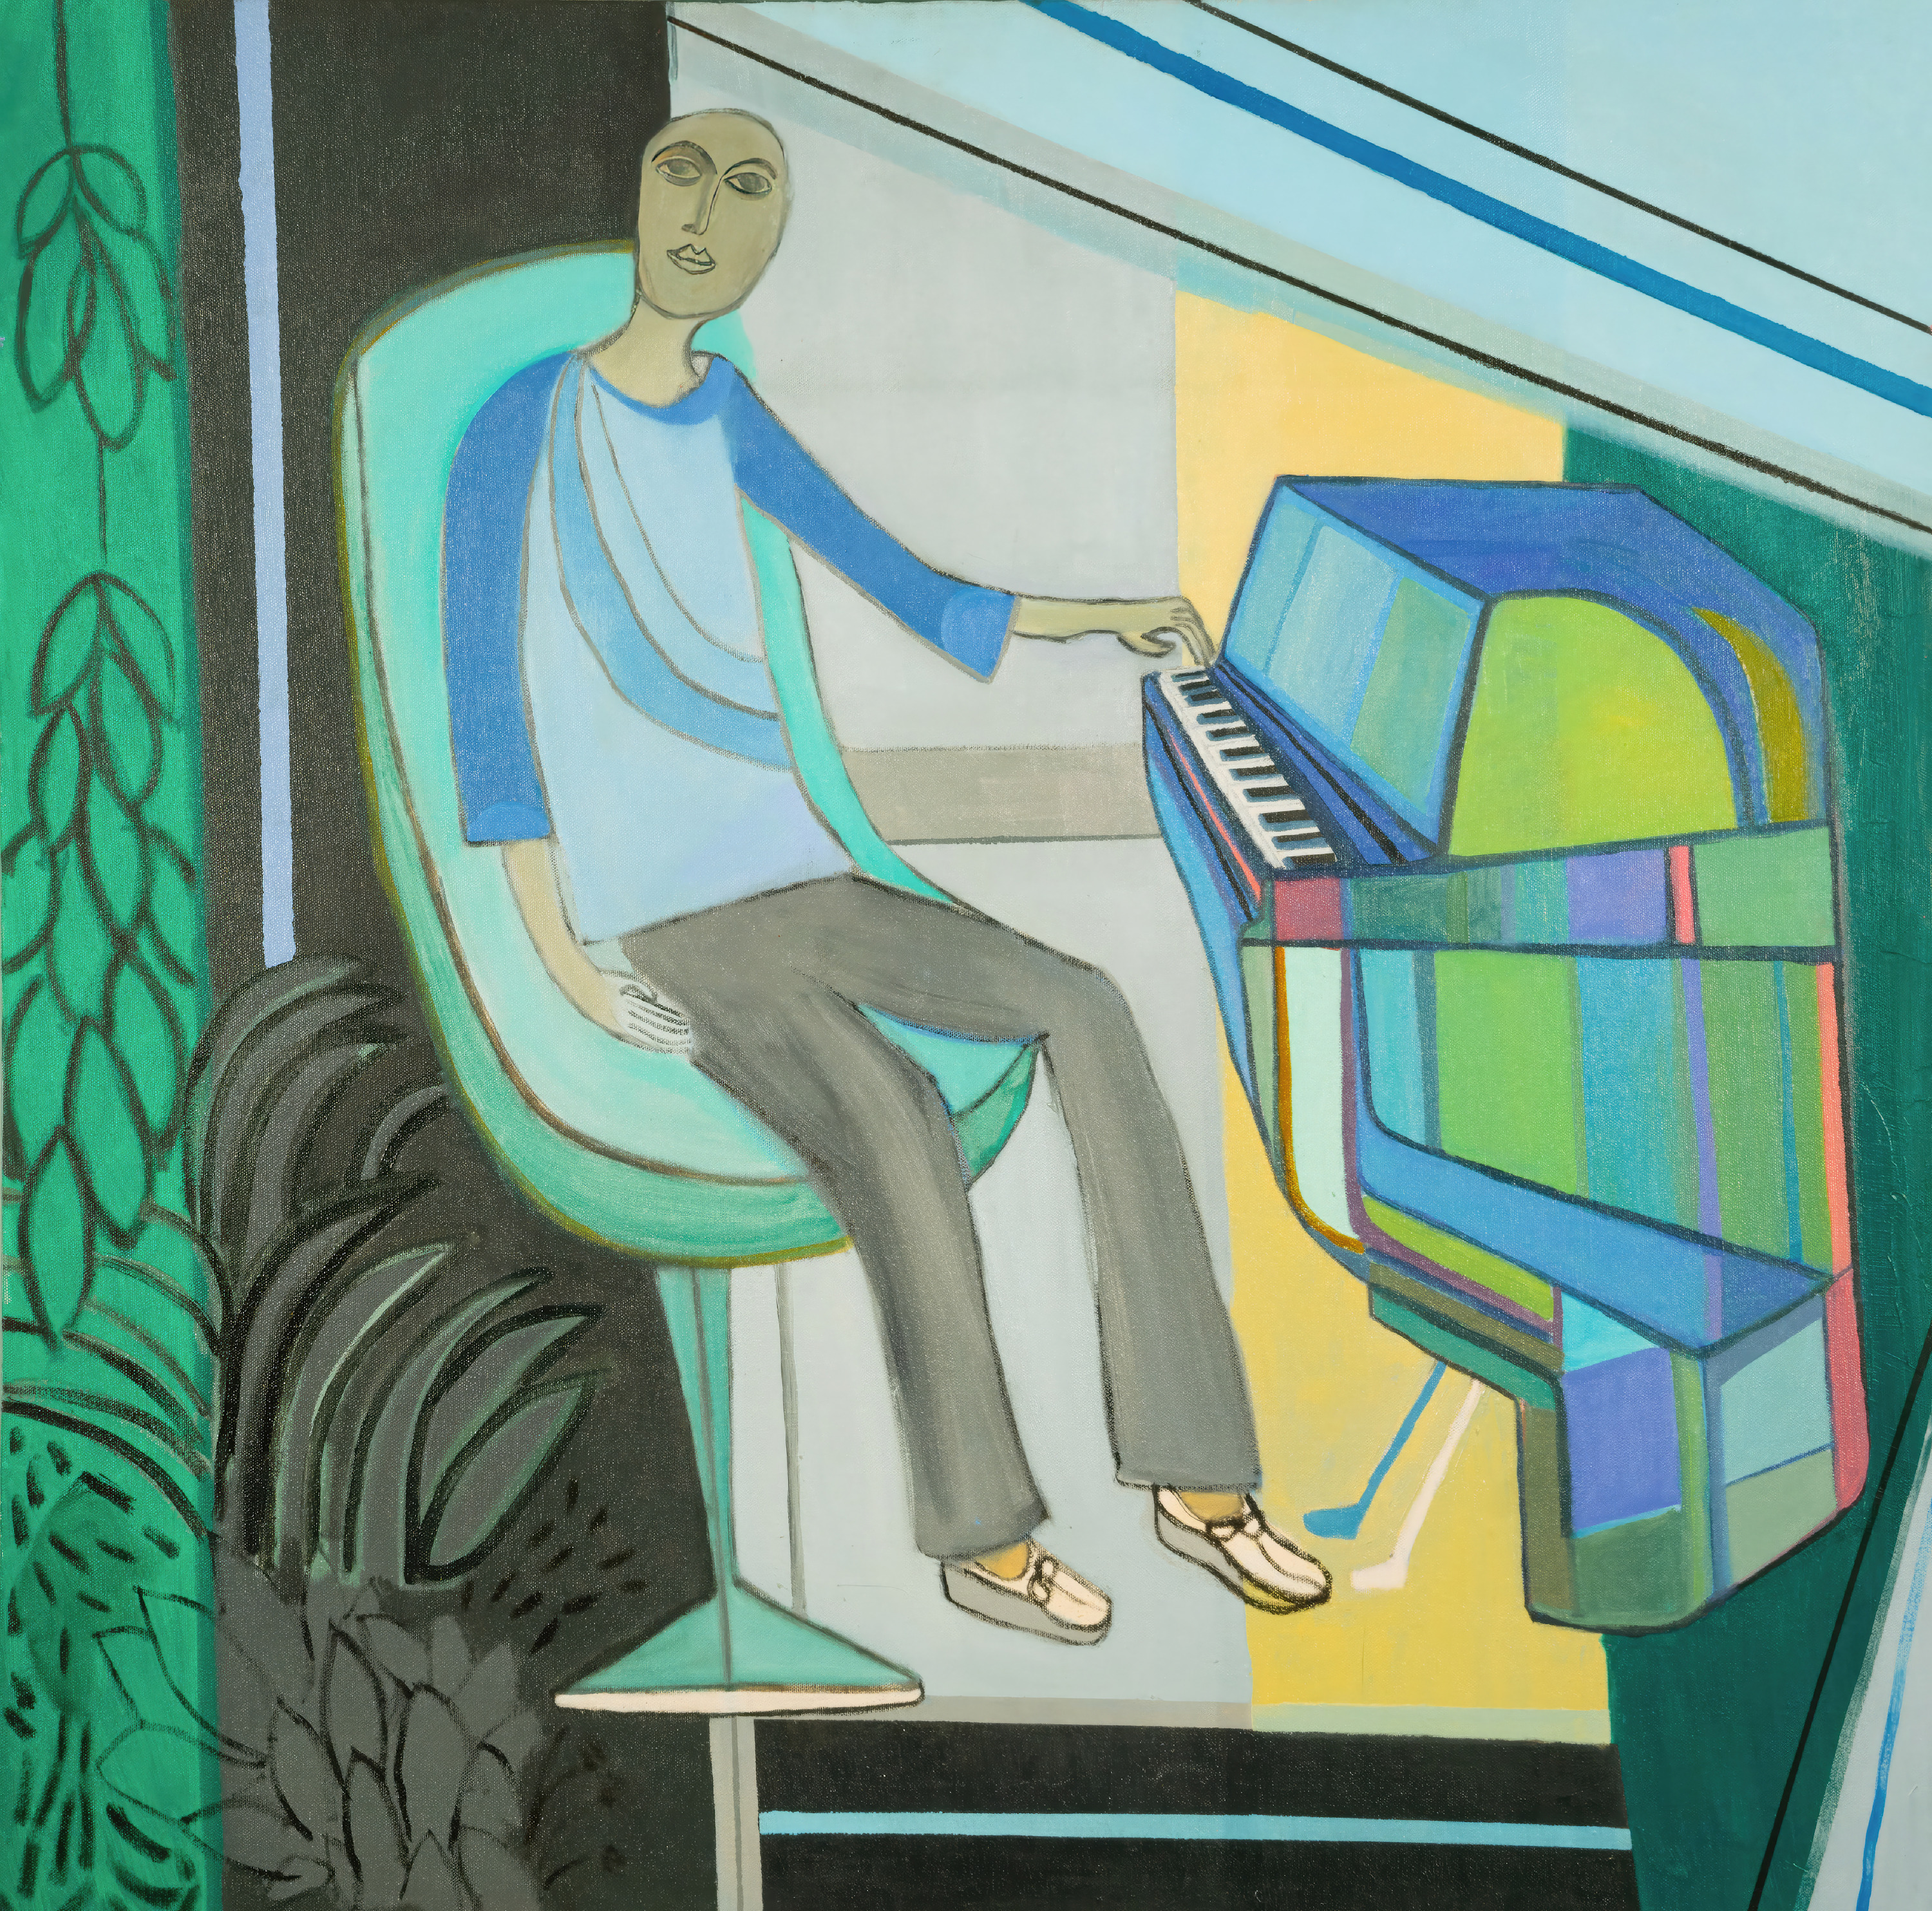 Piano man 2015 oil on canvas gigapixel standard scale 1 40x pchapi